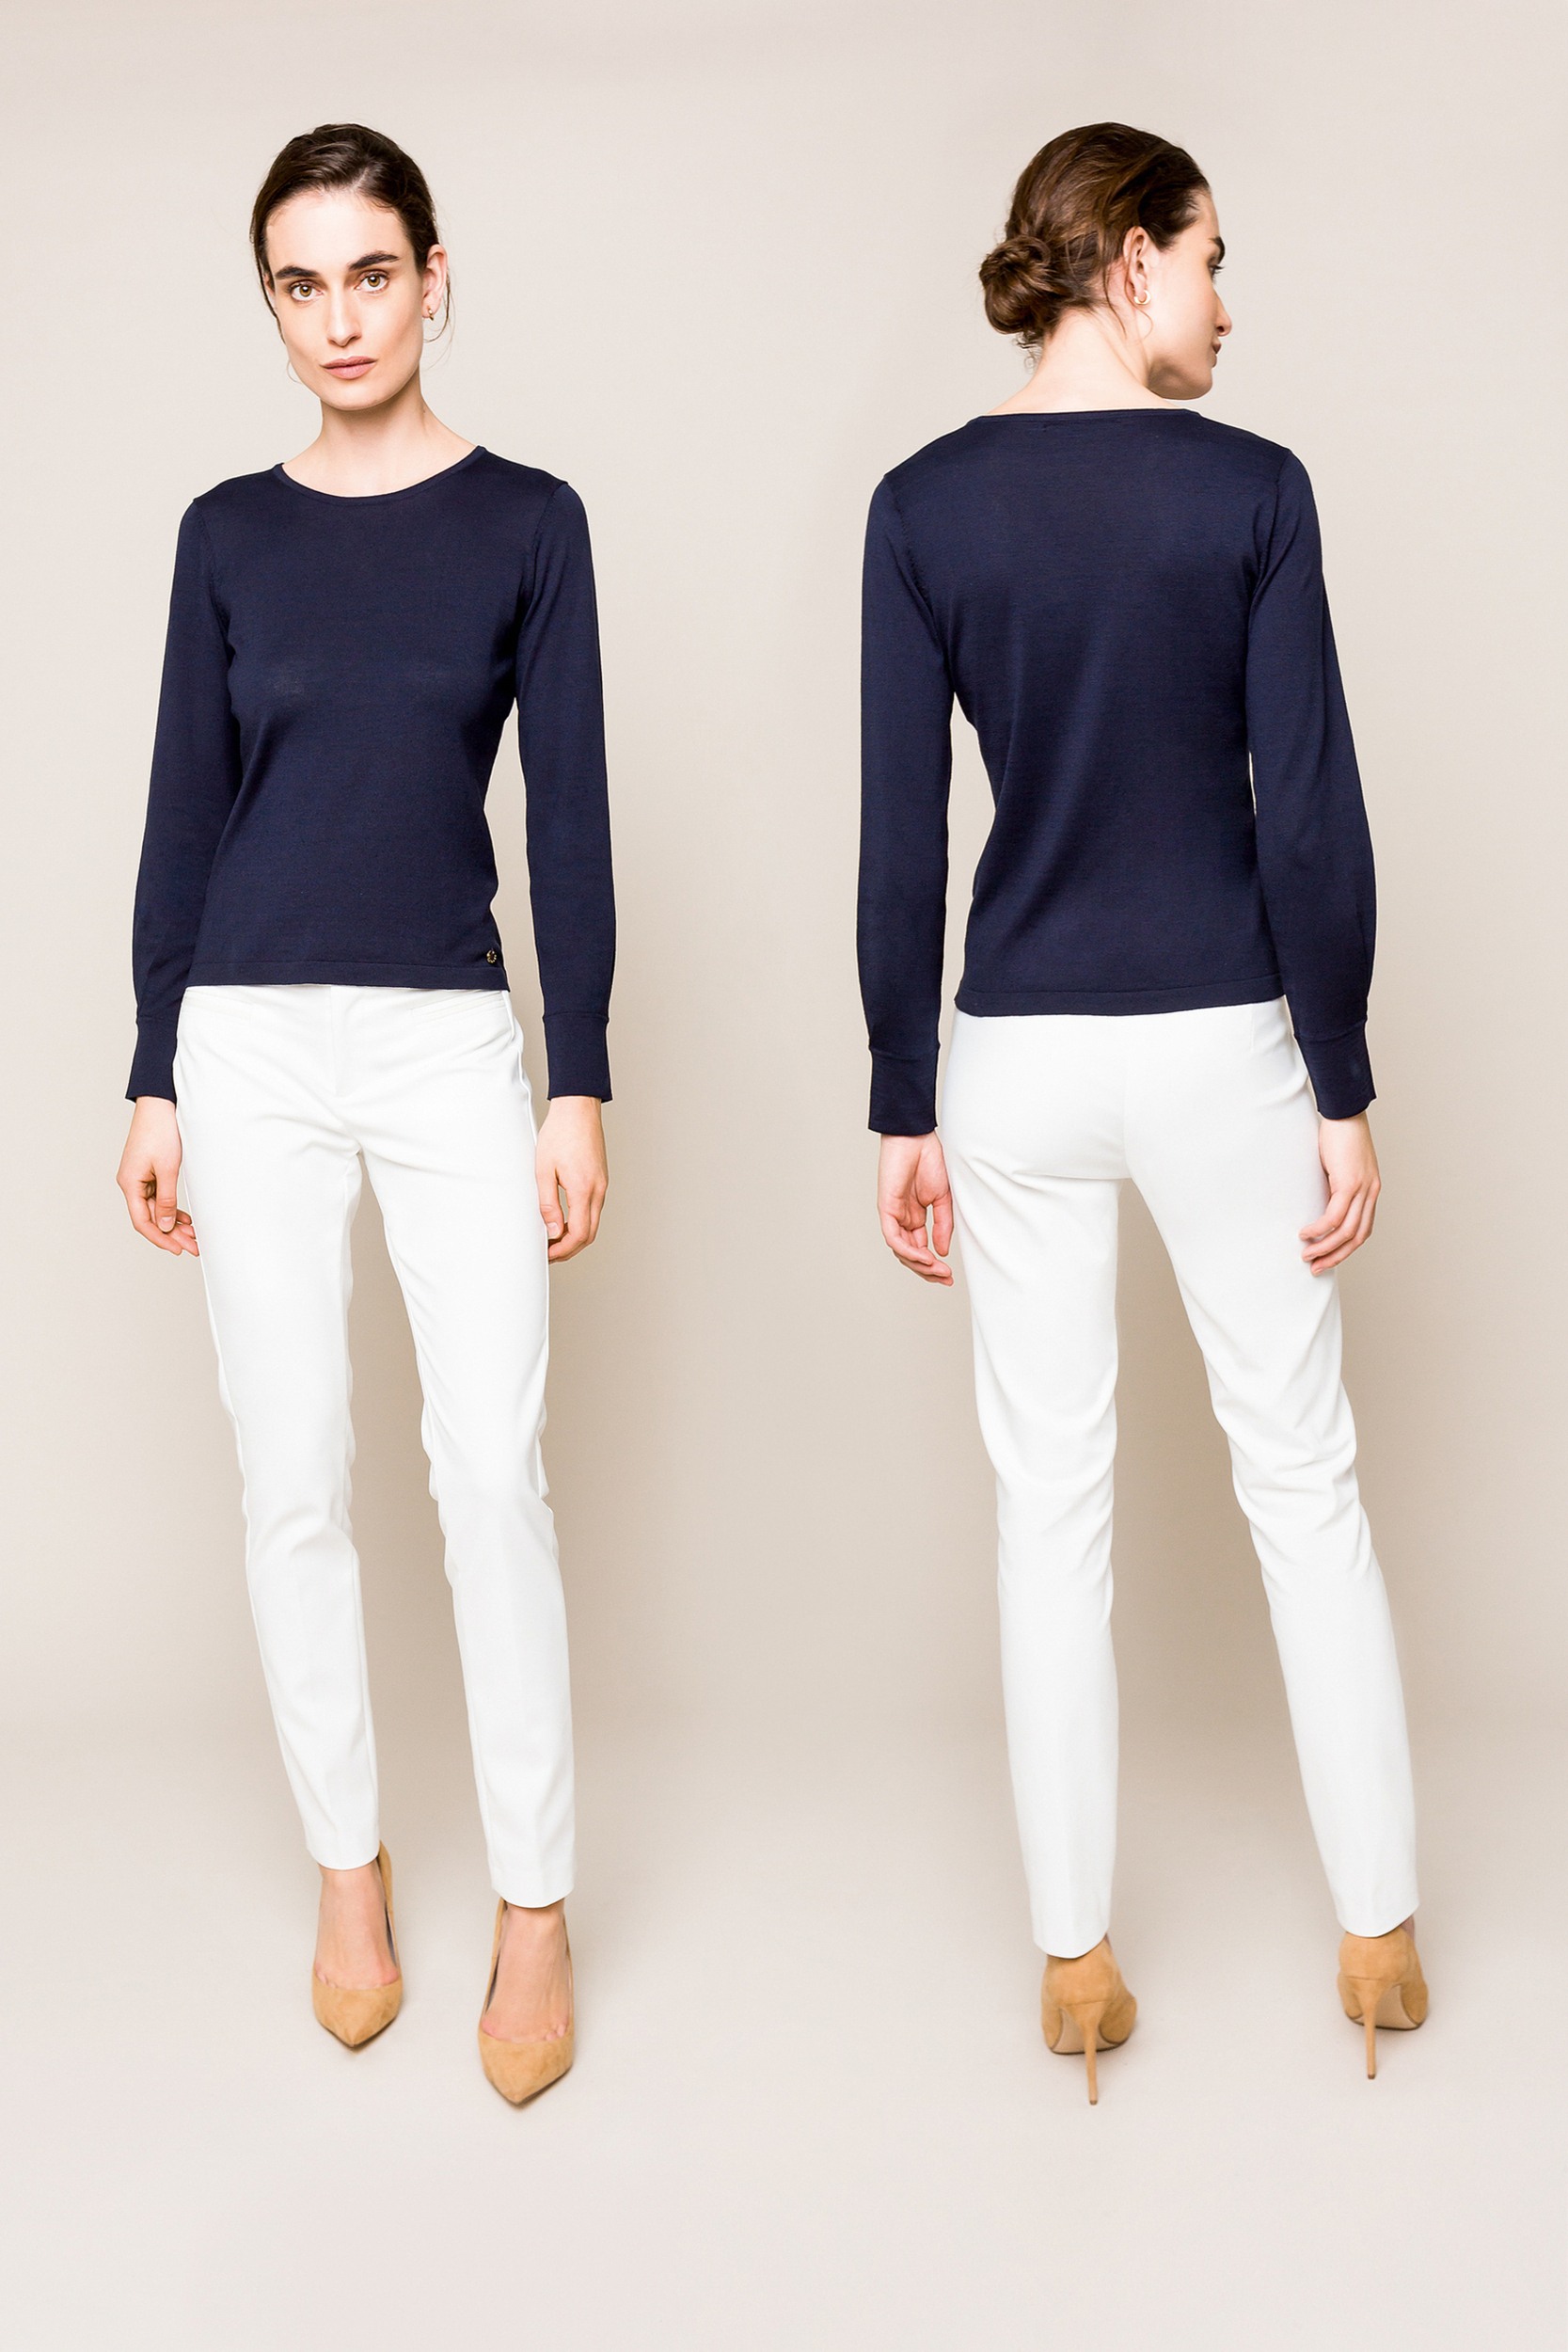 White cotton trousers with a slim fit